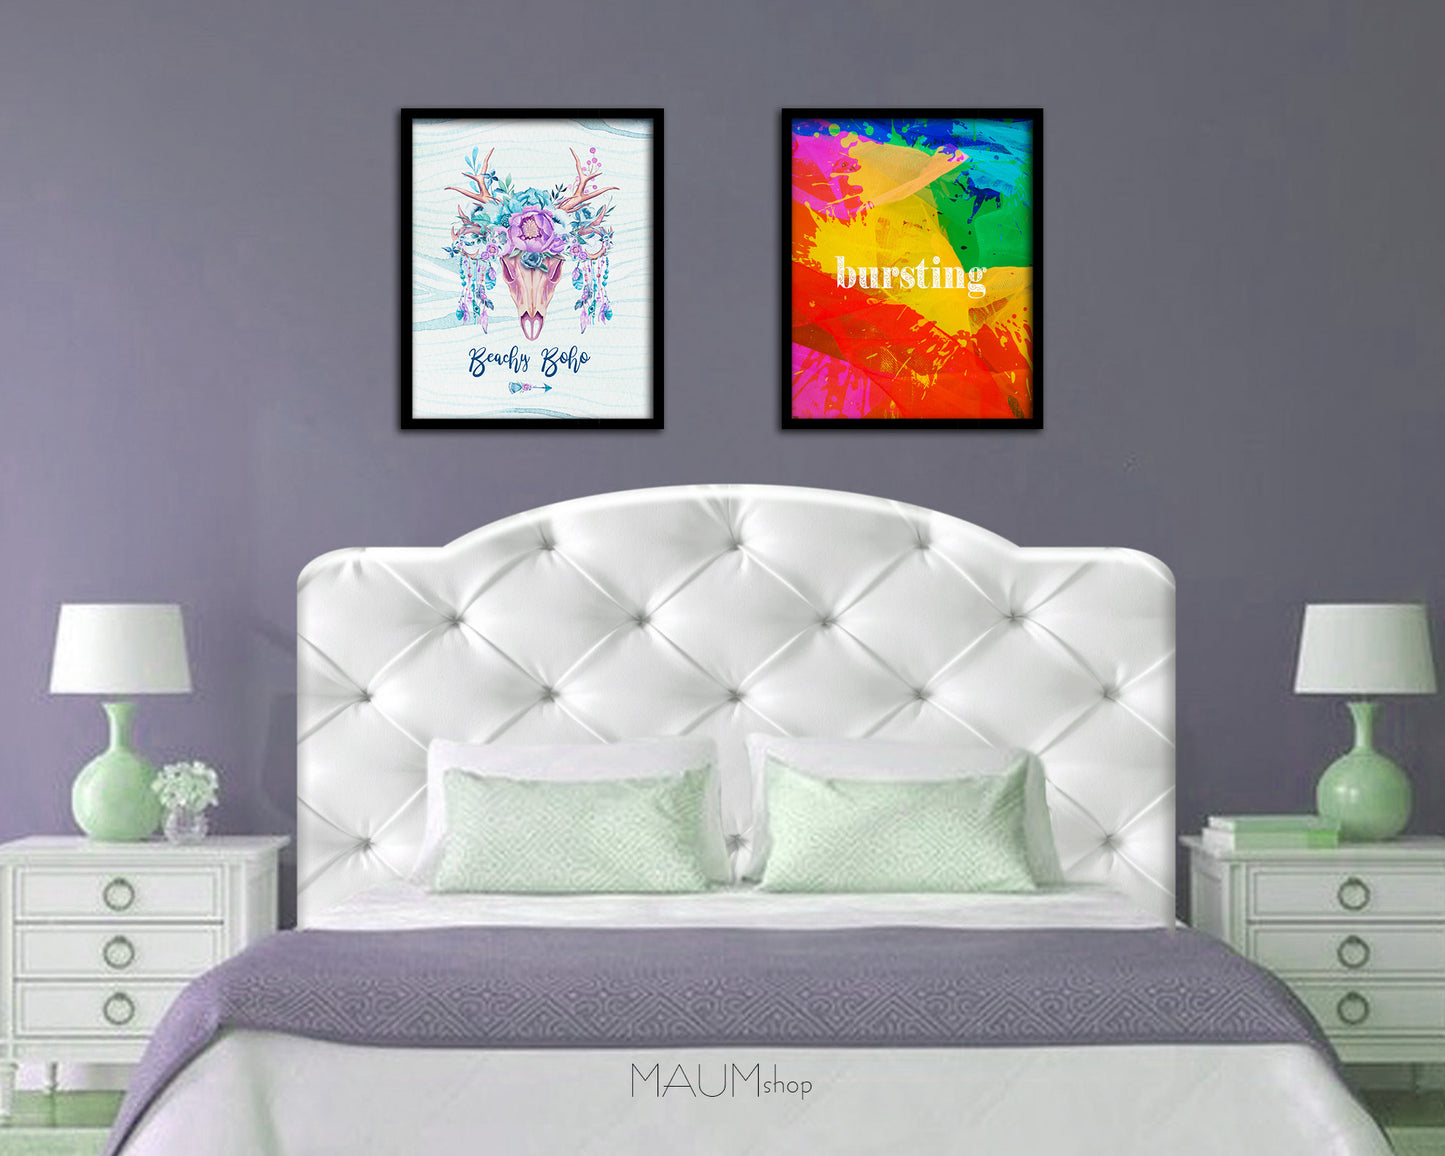 Bursting Quote Framed Print Wall Decor Art Gifts